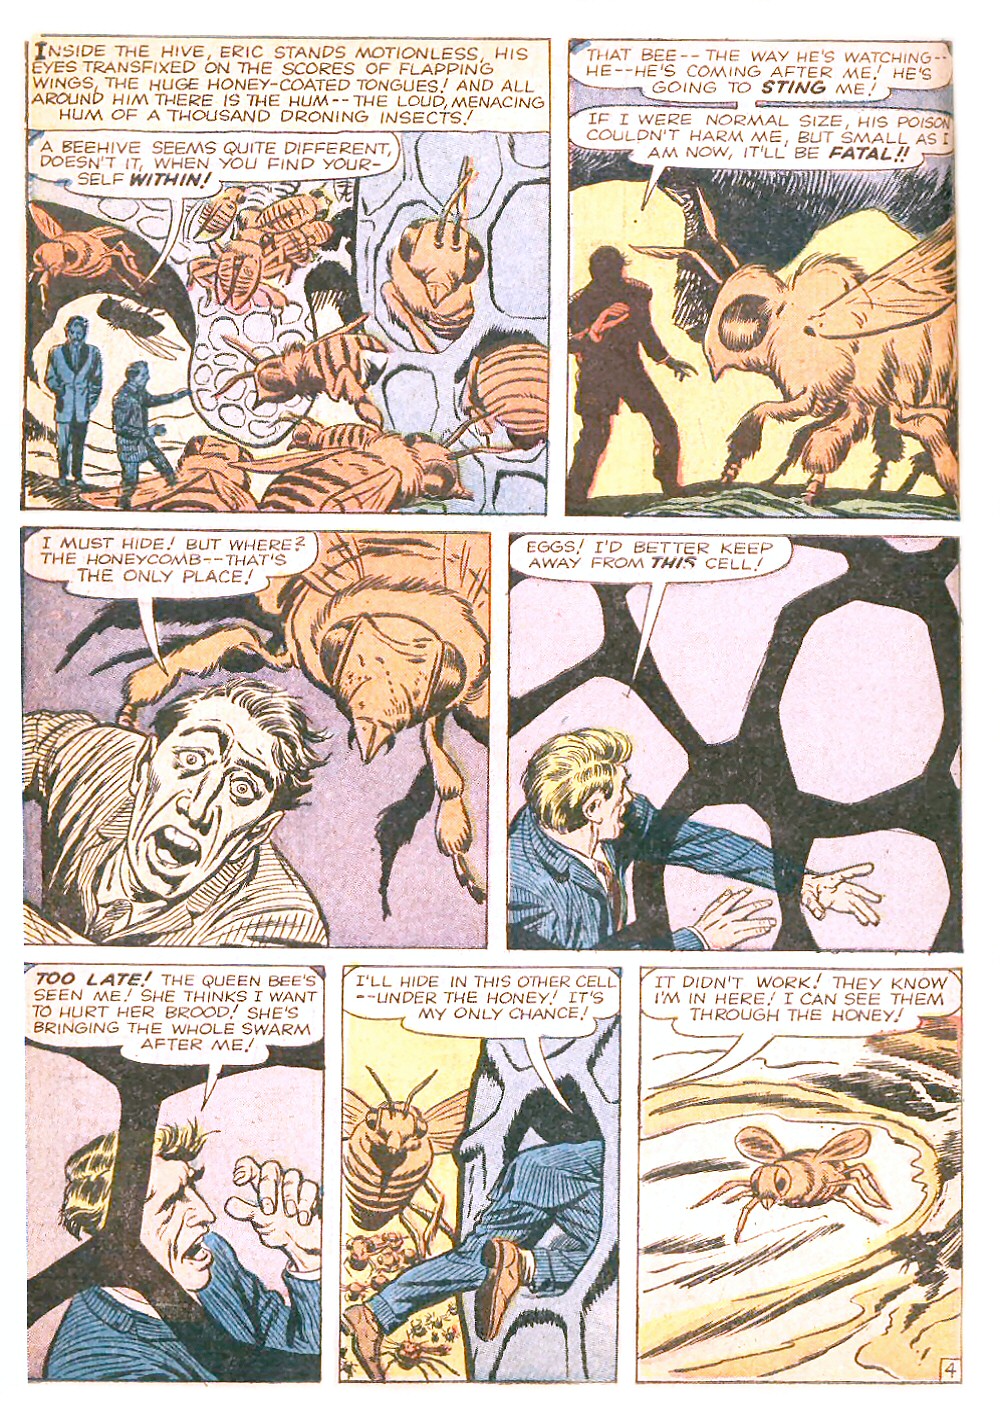 Tales of Suspense (1959) 32 Page 5